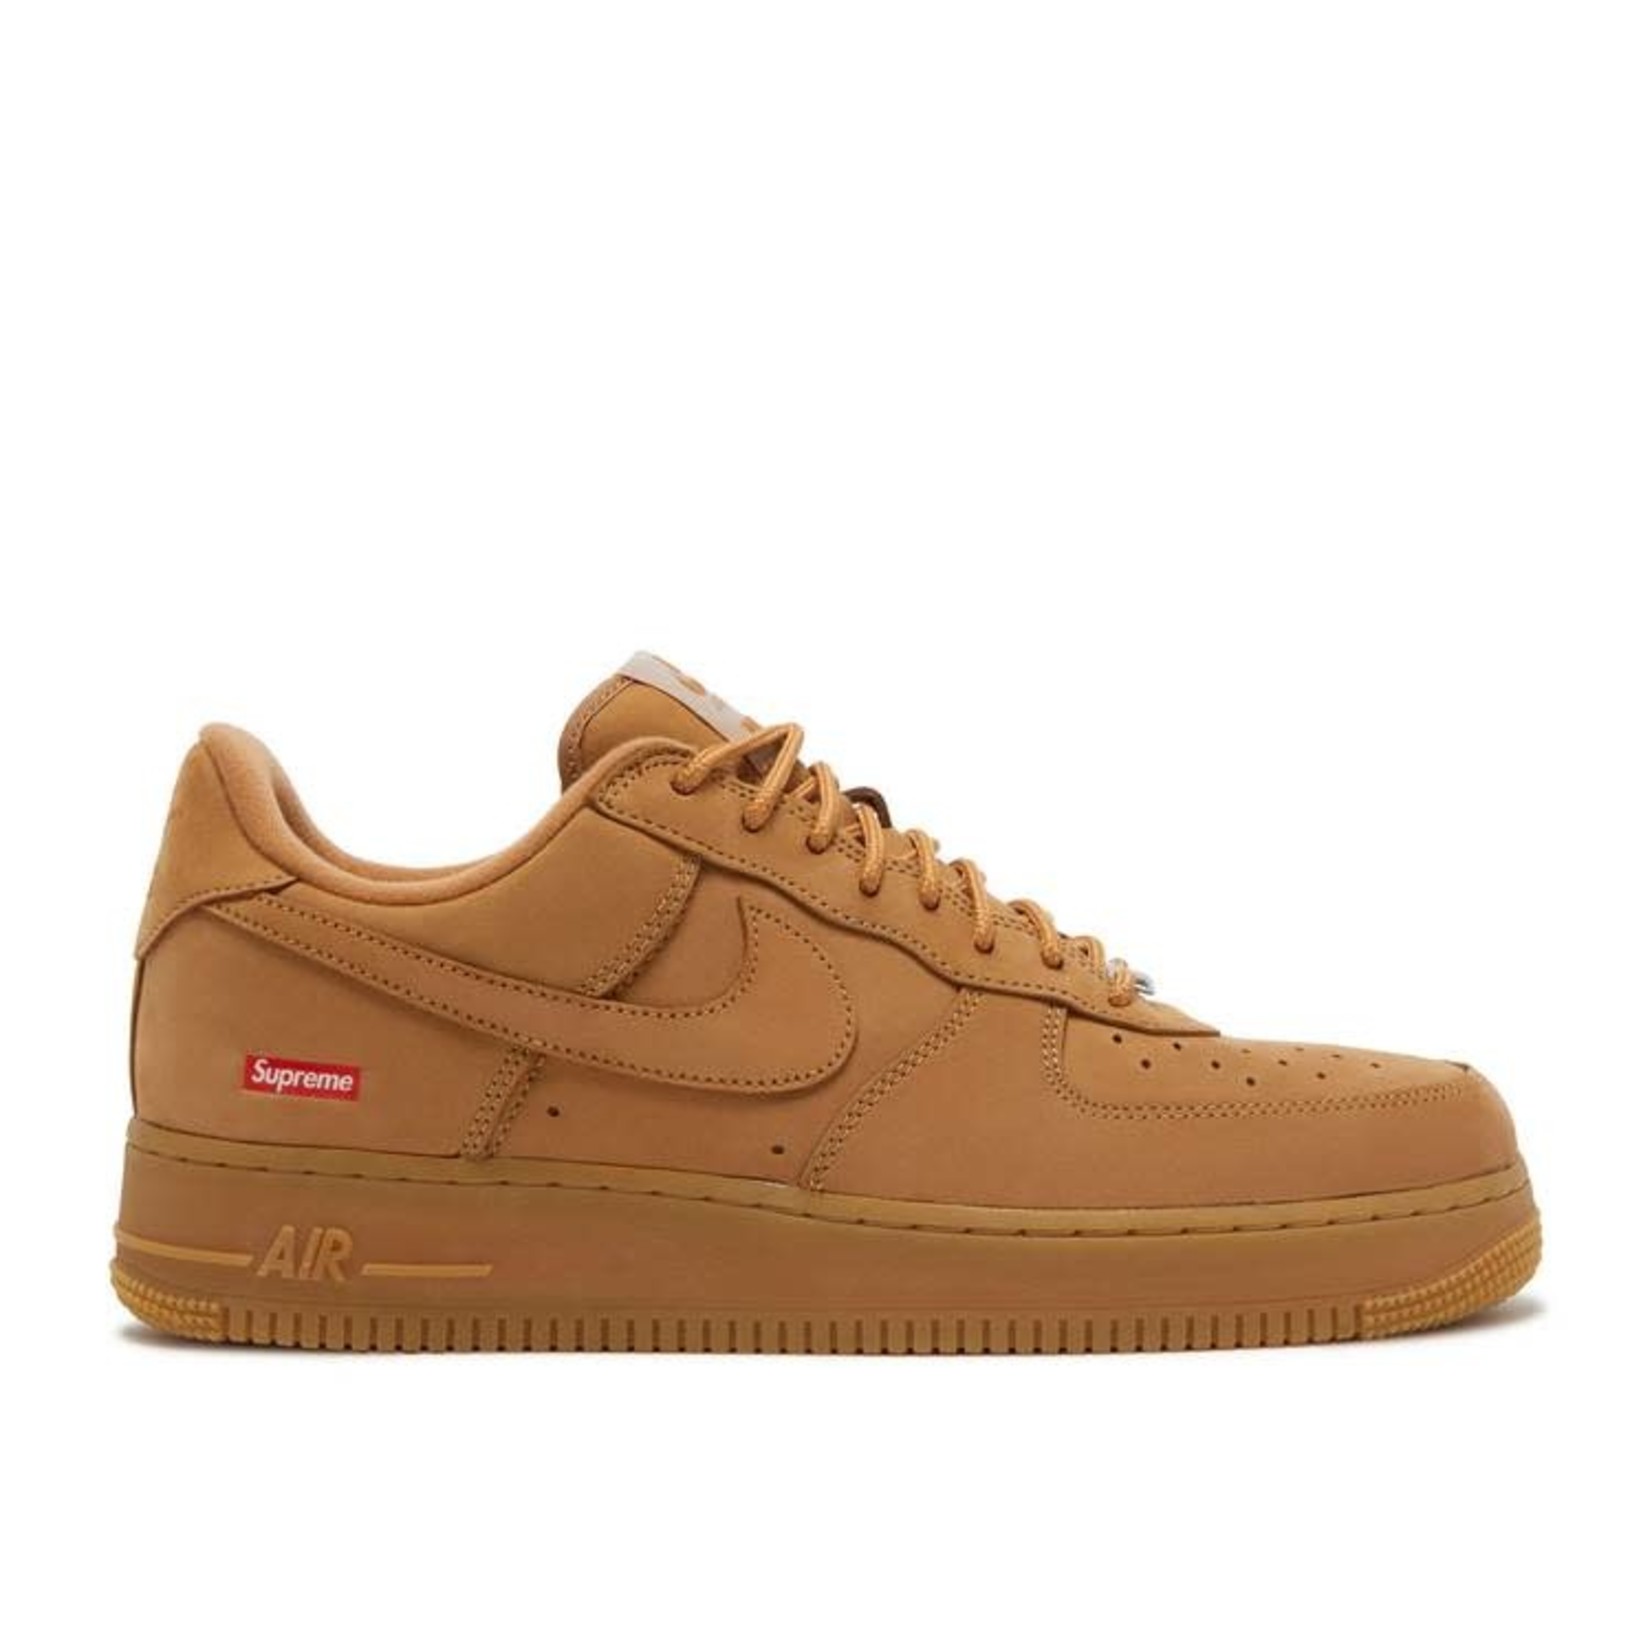 Nike Nike Air Force 1 Low SP Supreme Wheat Size 8.5, DS BRAND NEW